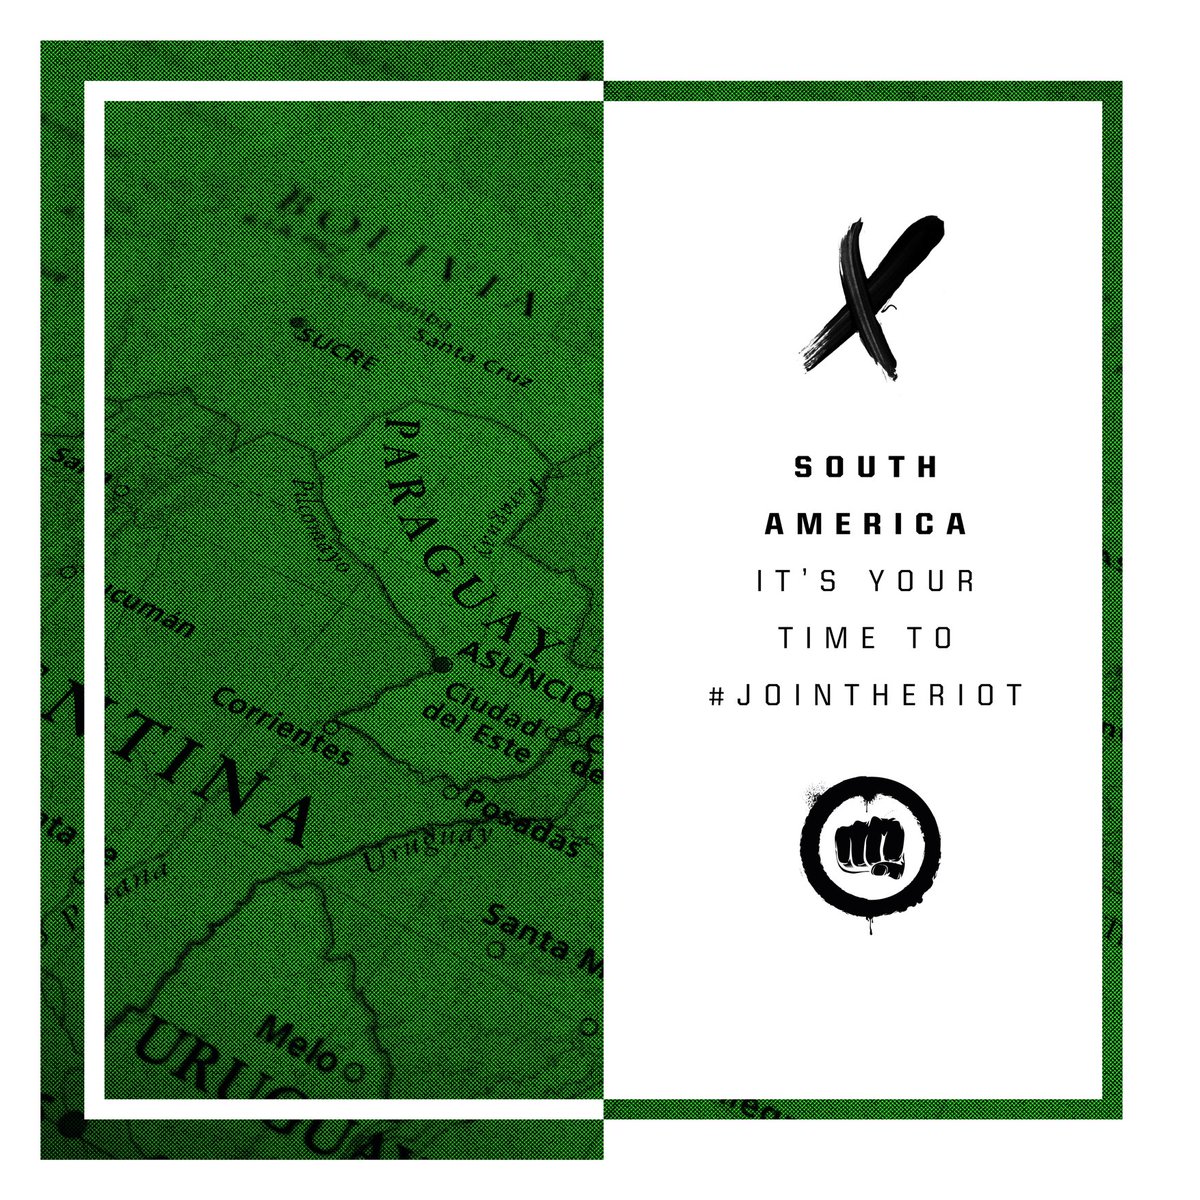 Think you've got what it takes? We are looking for people in South America to join the Riot Squad team! Tag a mate to share the news! Check out the link in our bio for more details! #riotsquadeliquid #jointheriot #ejuicebr #juicebr #eliquidbr #vapebr #vapebrasil #chilevapea